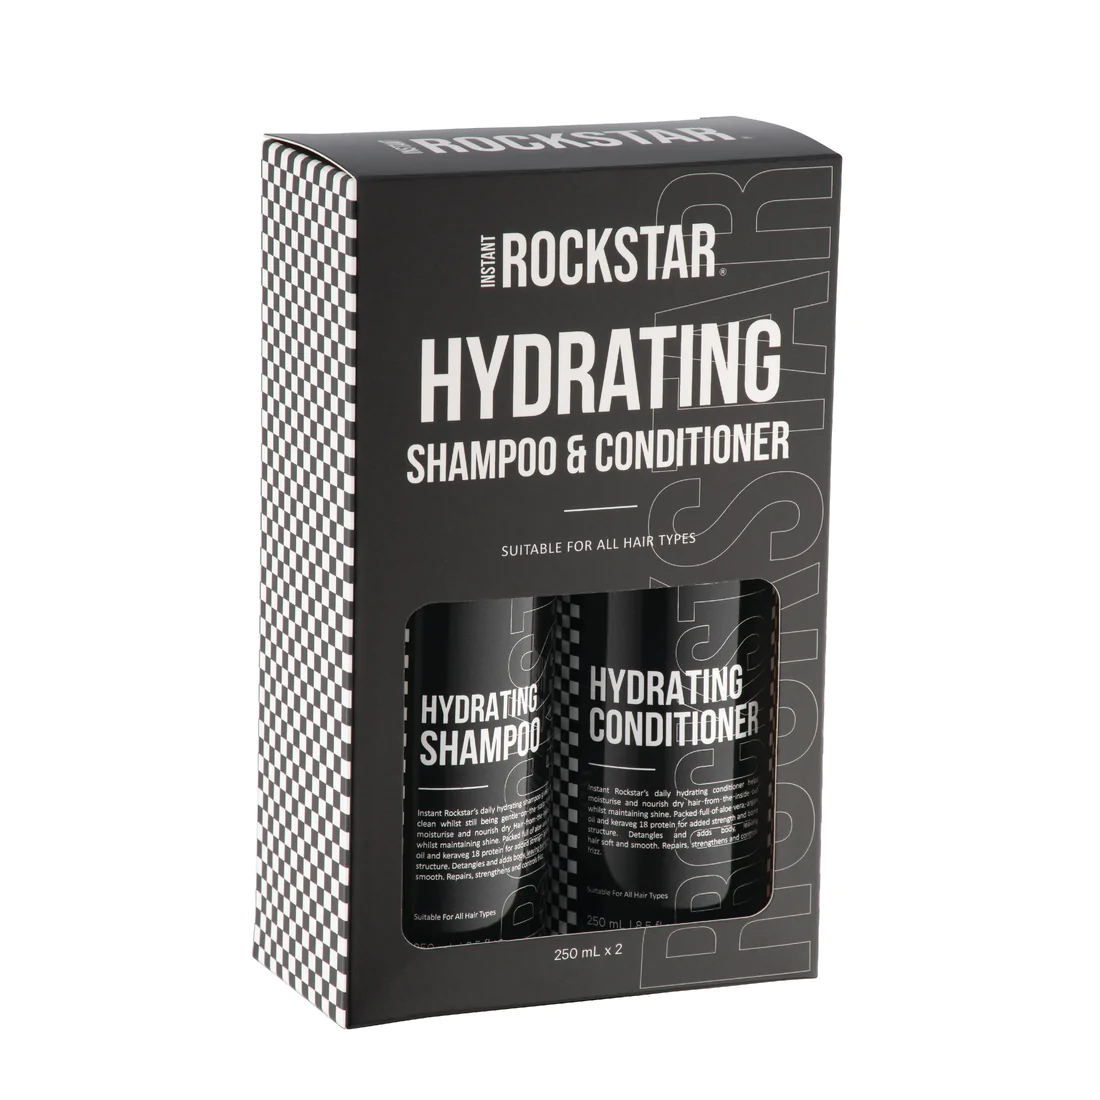 Instant Rockstar Hydrating Shampoo And Conditioner Duo Pack - 250ml